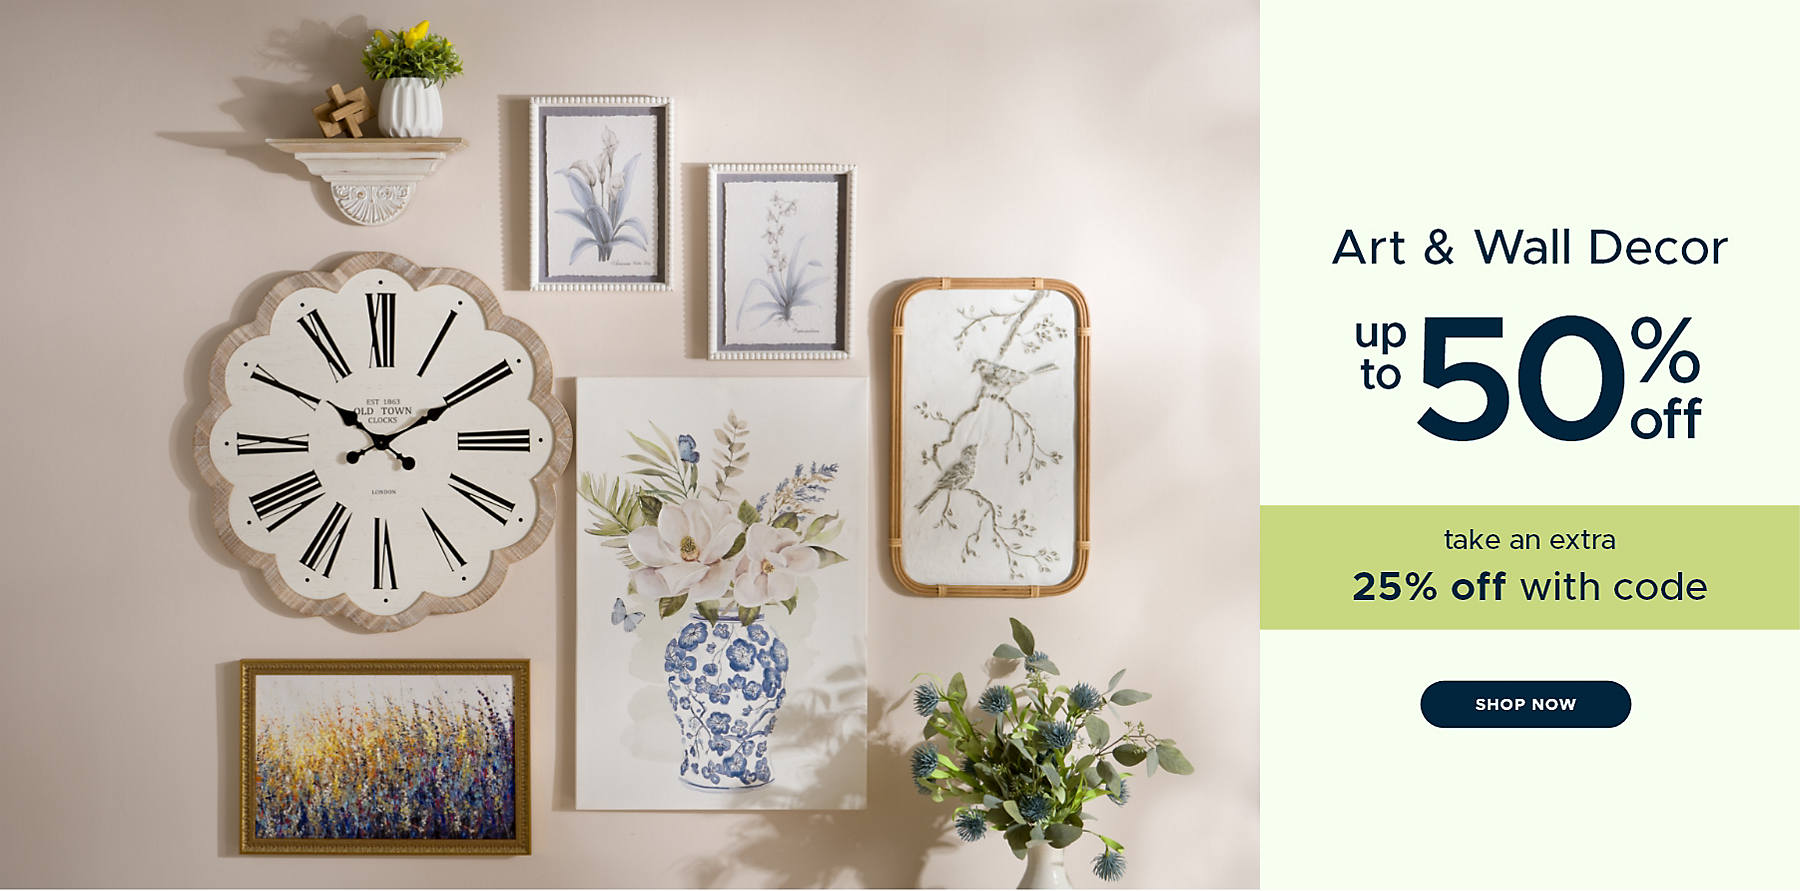 Art & Wall Decor up to 50% off take an extra 25% off with code shop now